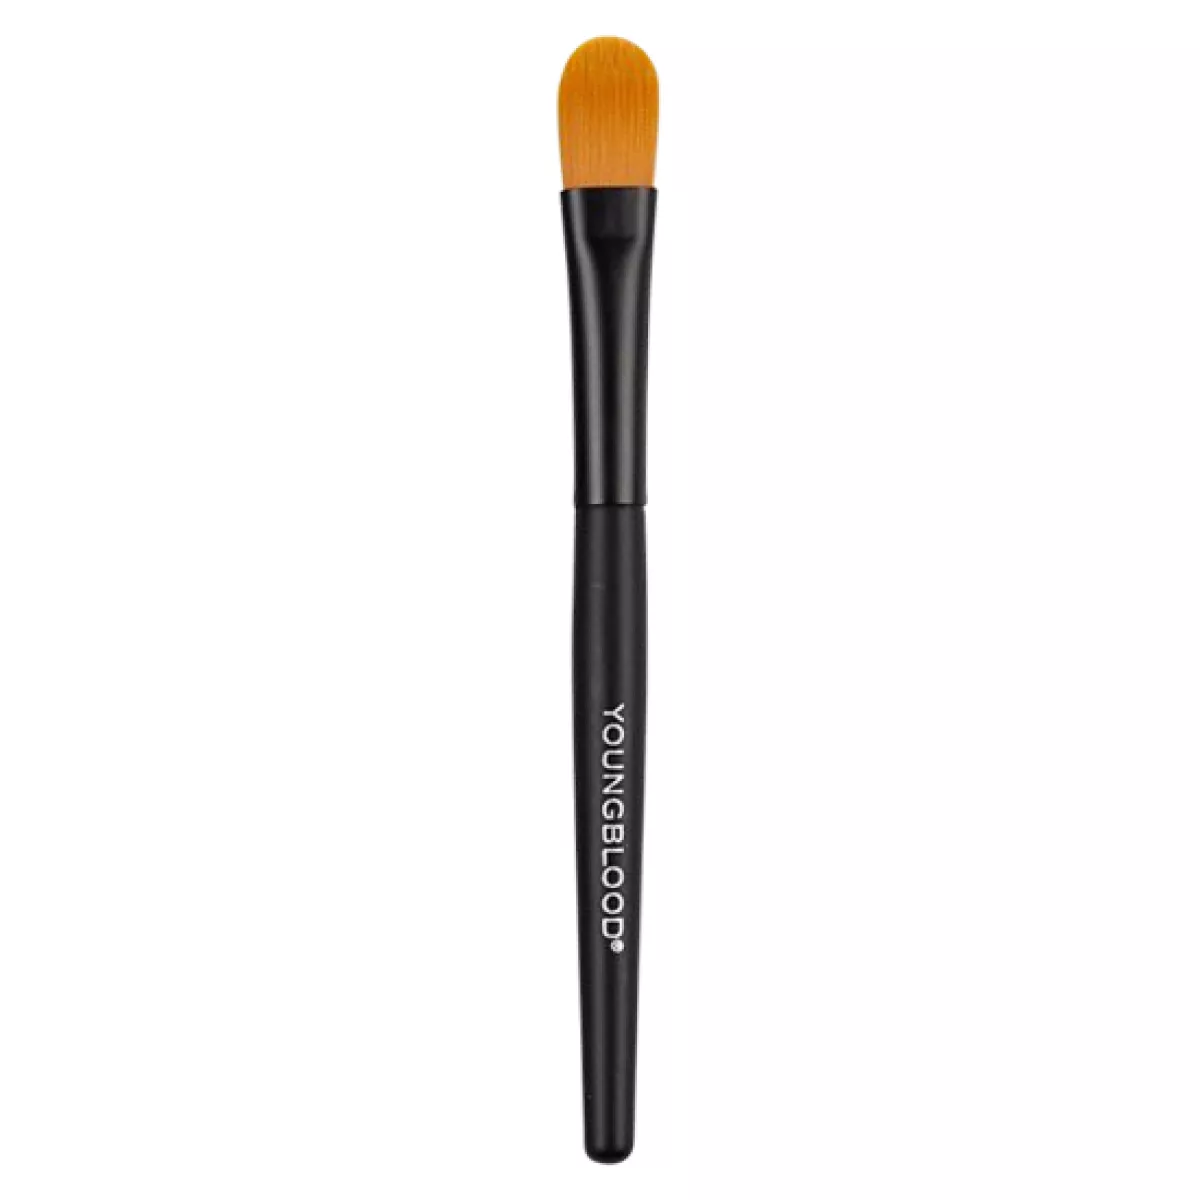 #3 - Youngblood Luxurious Concealer Brush